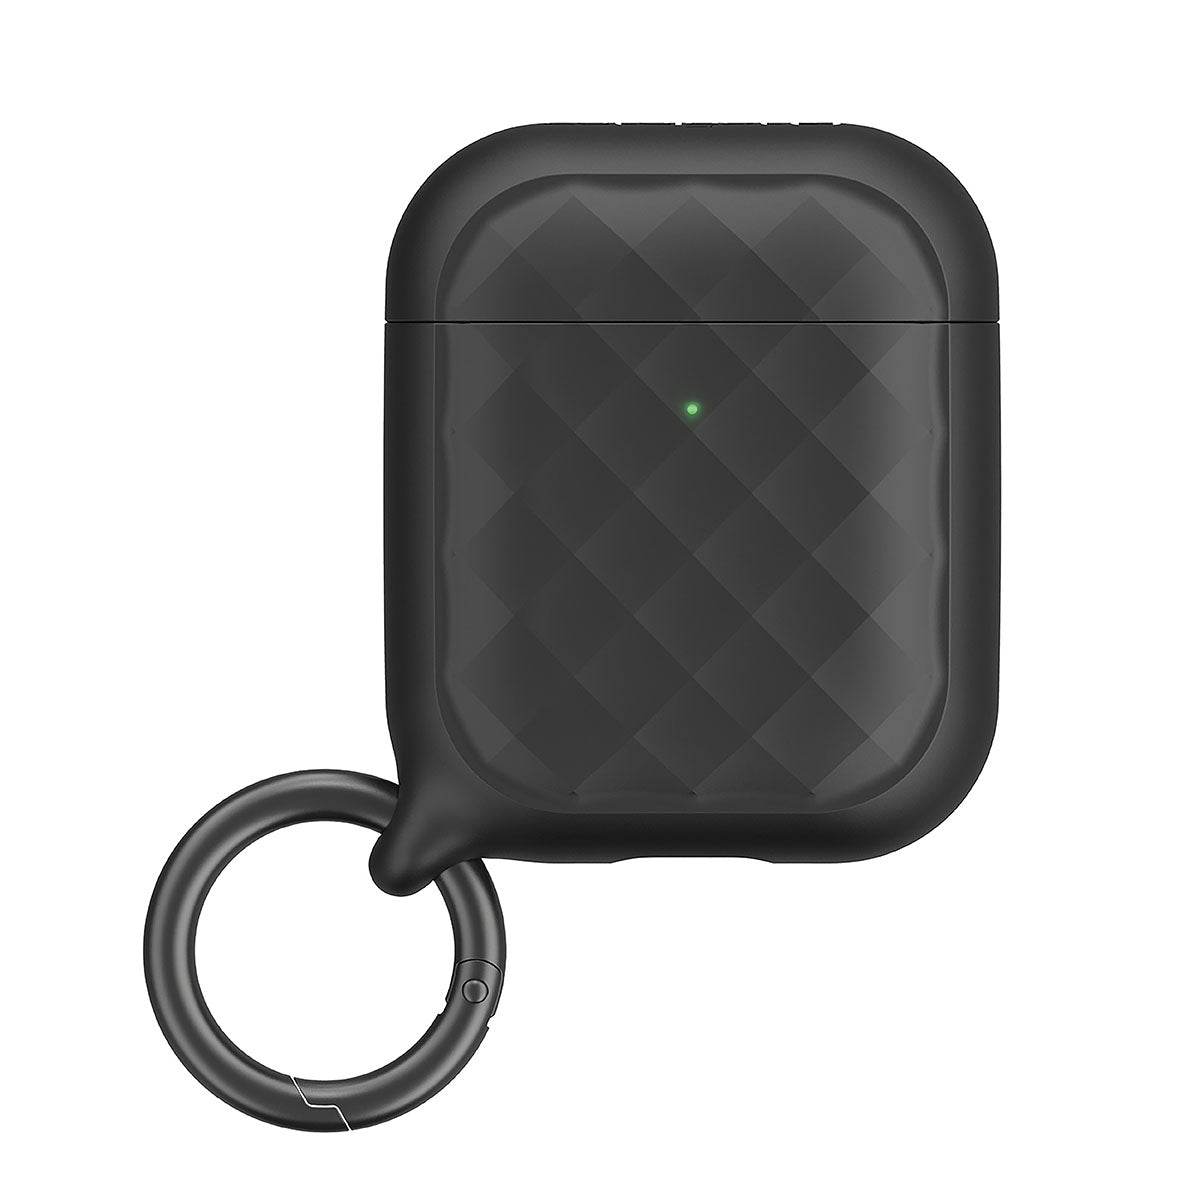 Catalyst airpods gen2/1 case eing clip carabiner showing the side of the case with ring clip carabiner attached